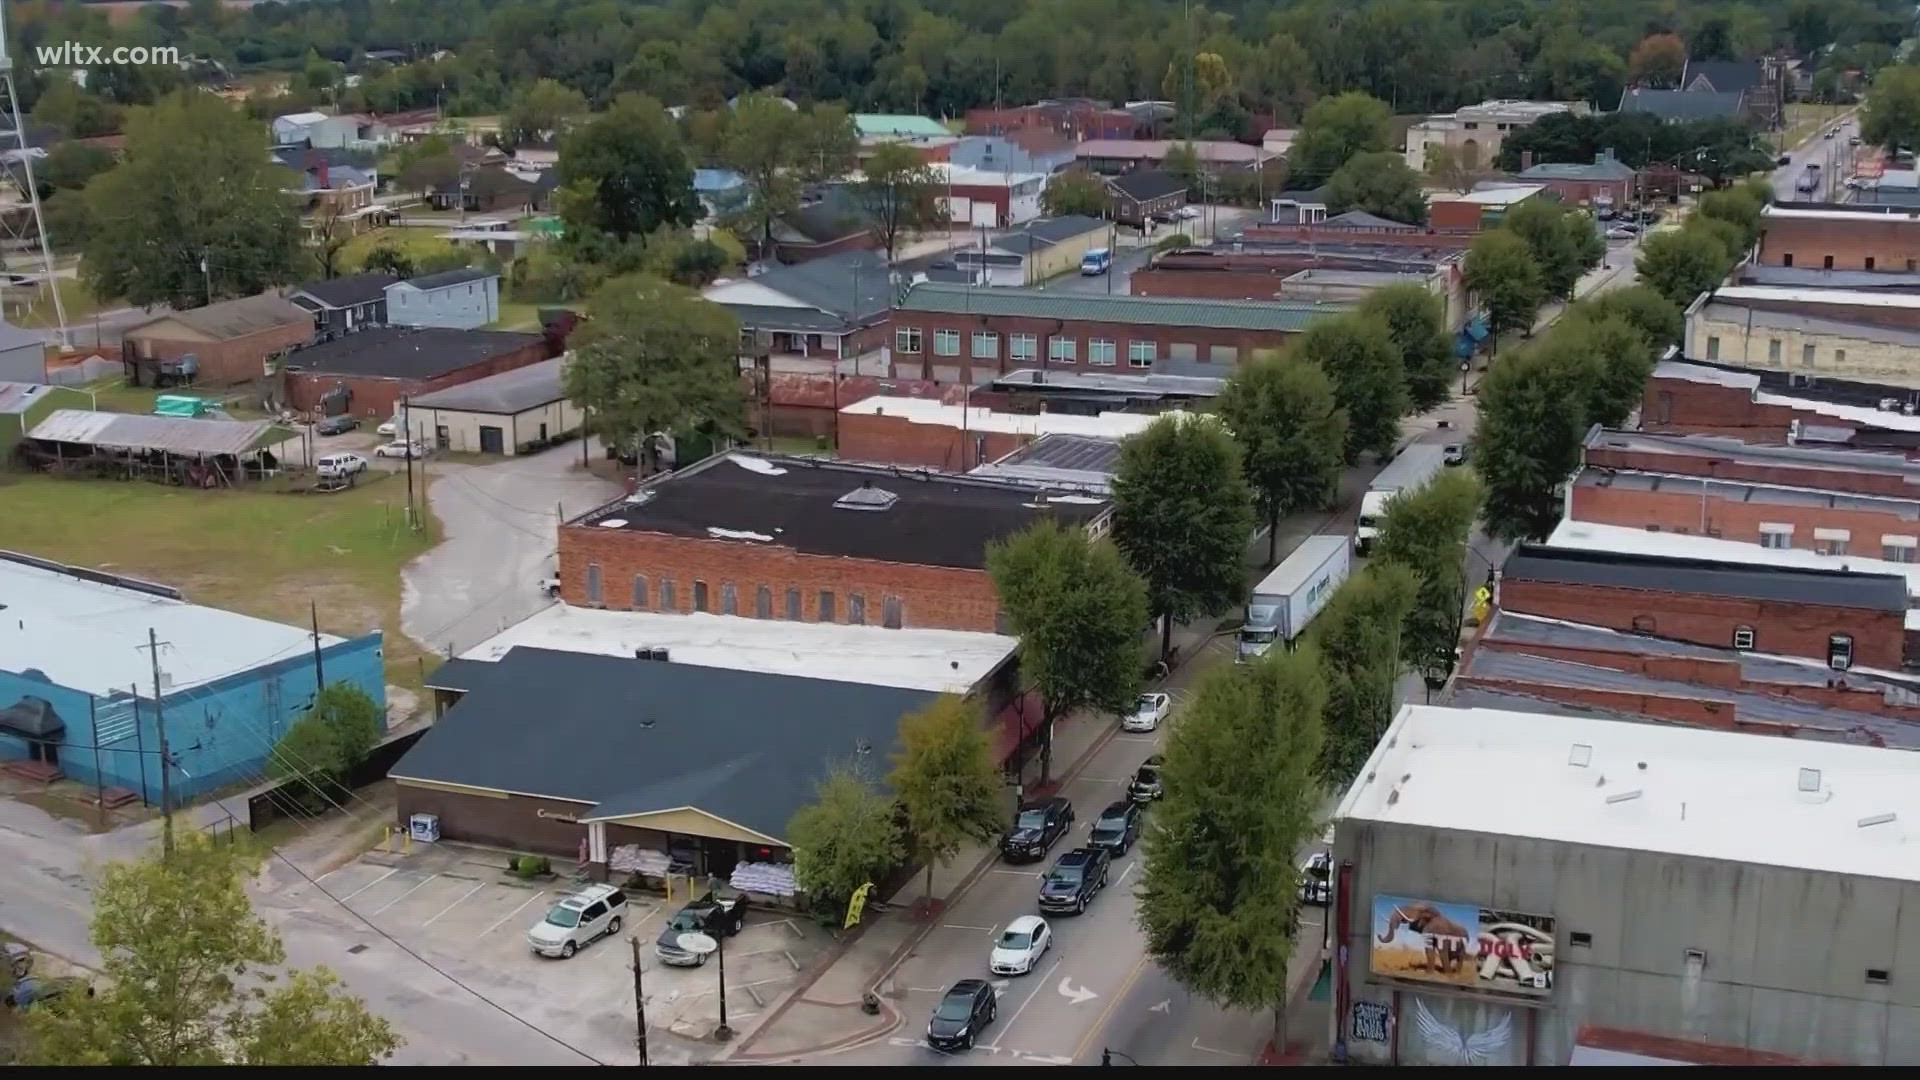 A bird's eye view of the community will soon be available for the Bishopville Police department.